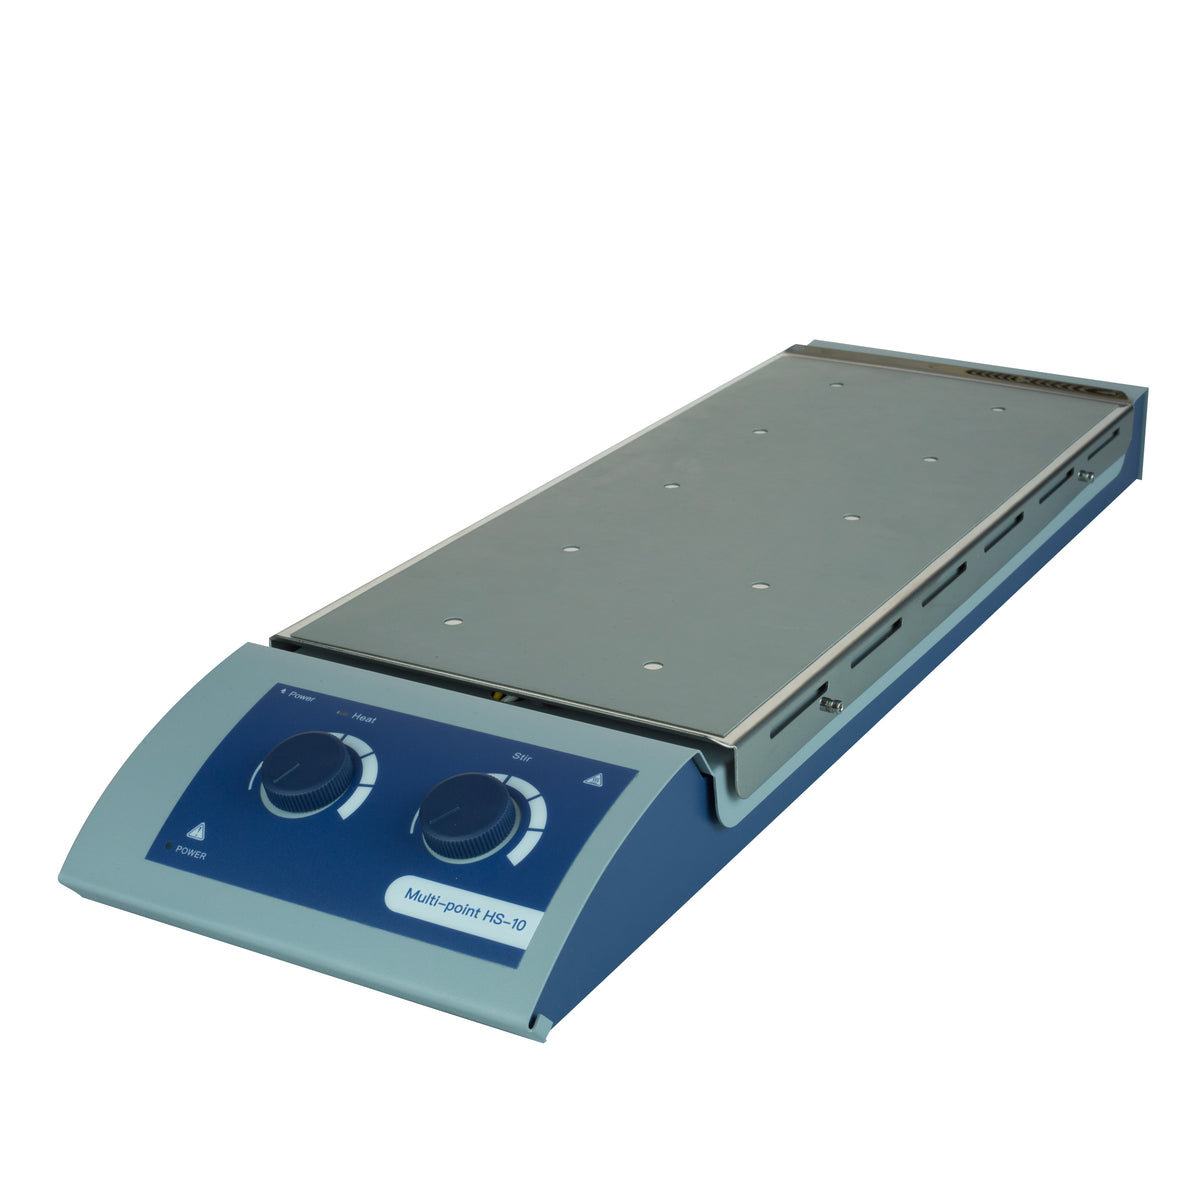 10-Channel Classic Hotplate Magnetic Stirrer Stainless Steel Plate with Silicone Film Max Temp. 120°C